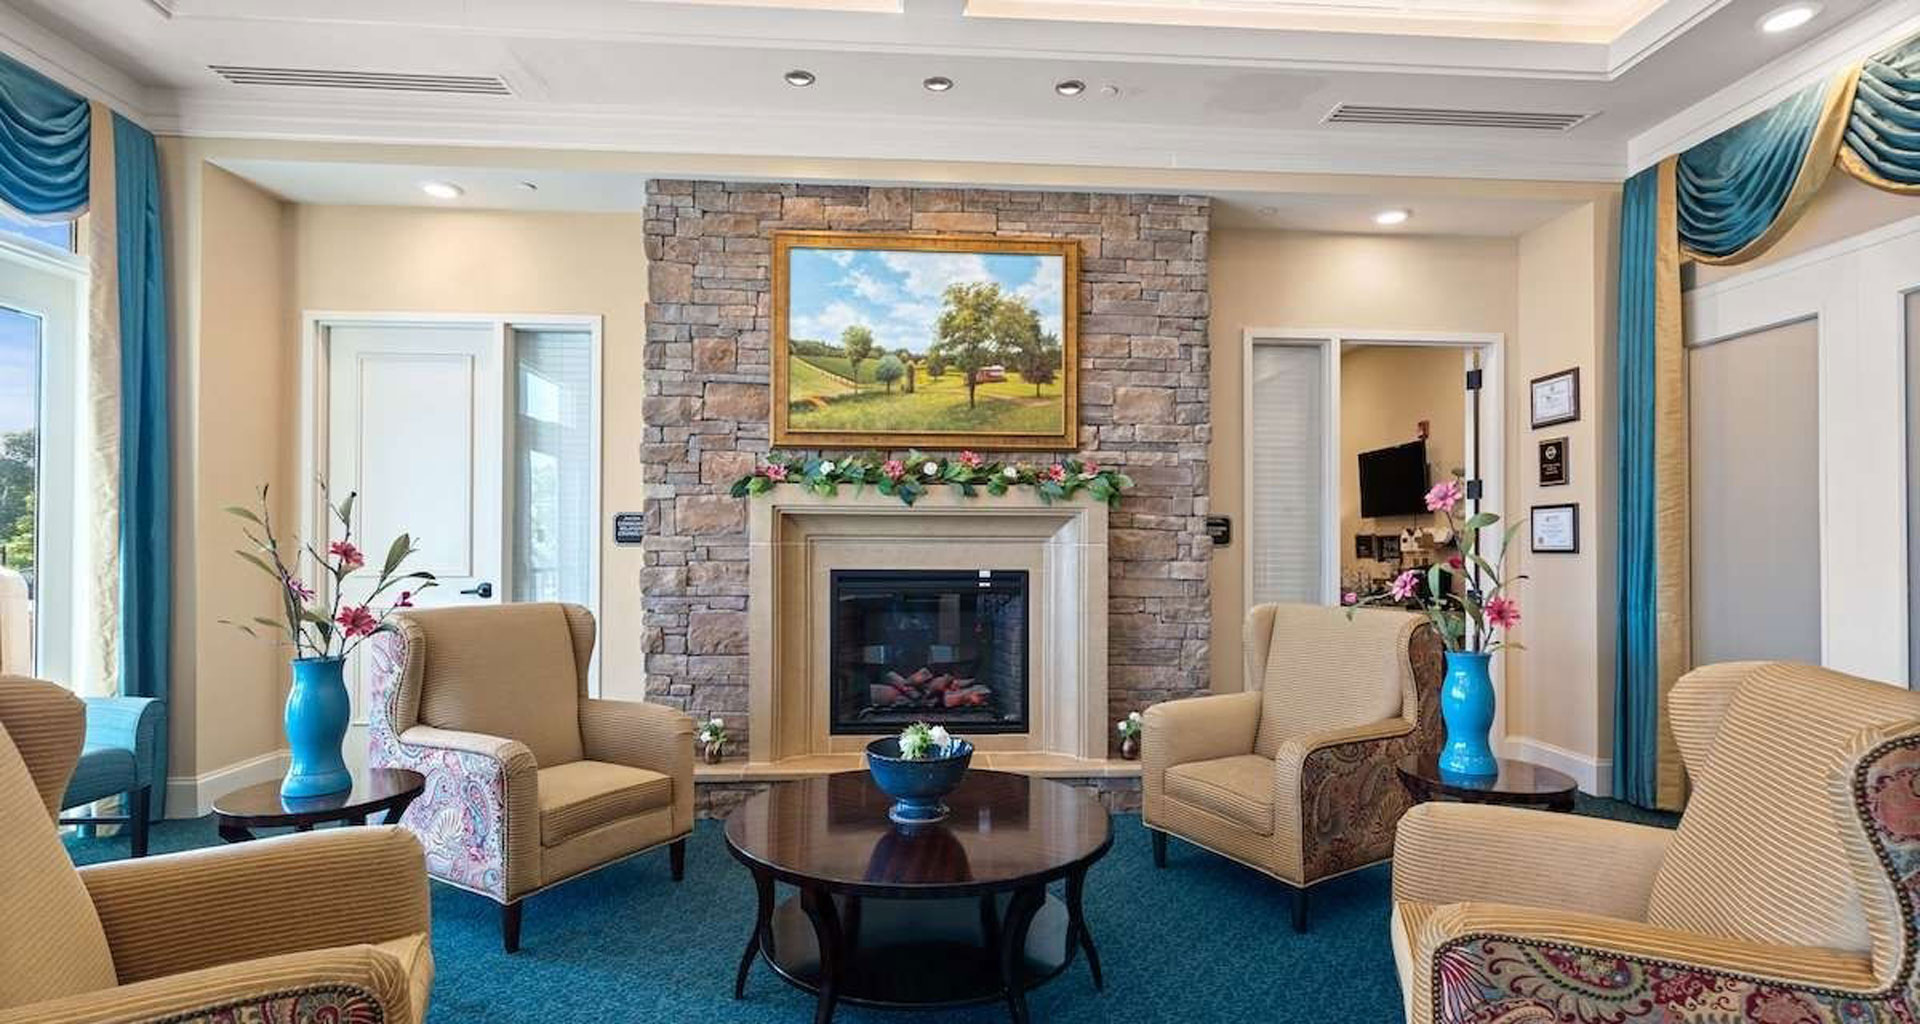 Lobby sitting area with fireplace